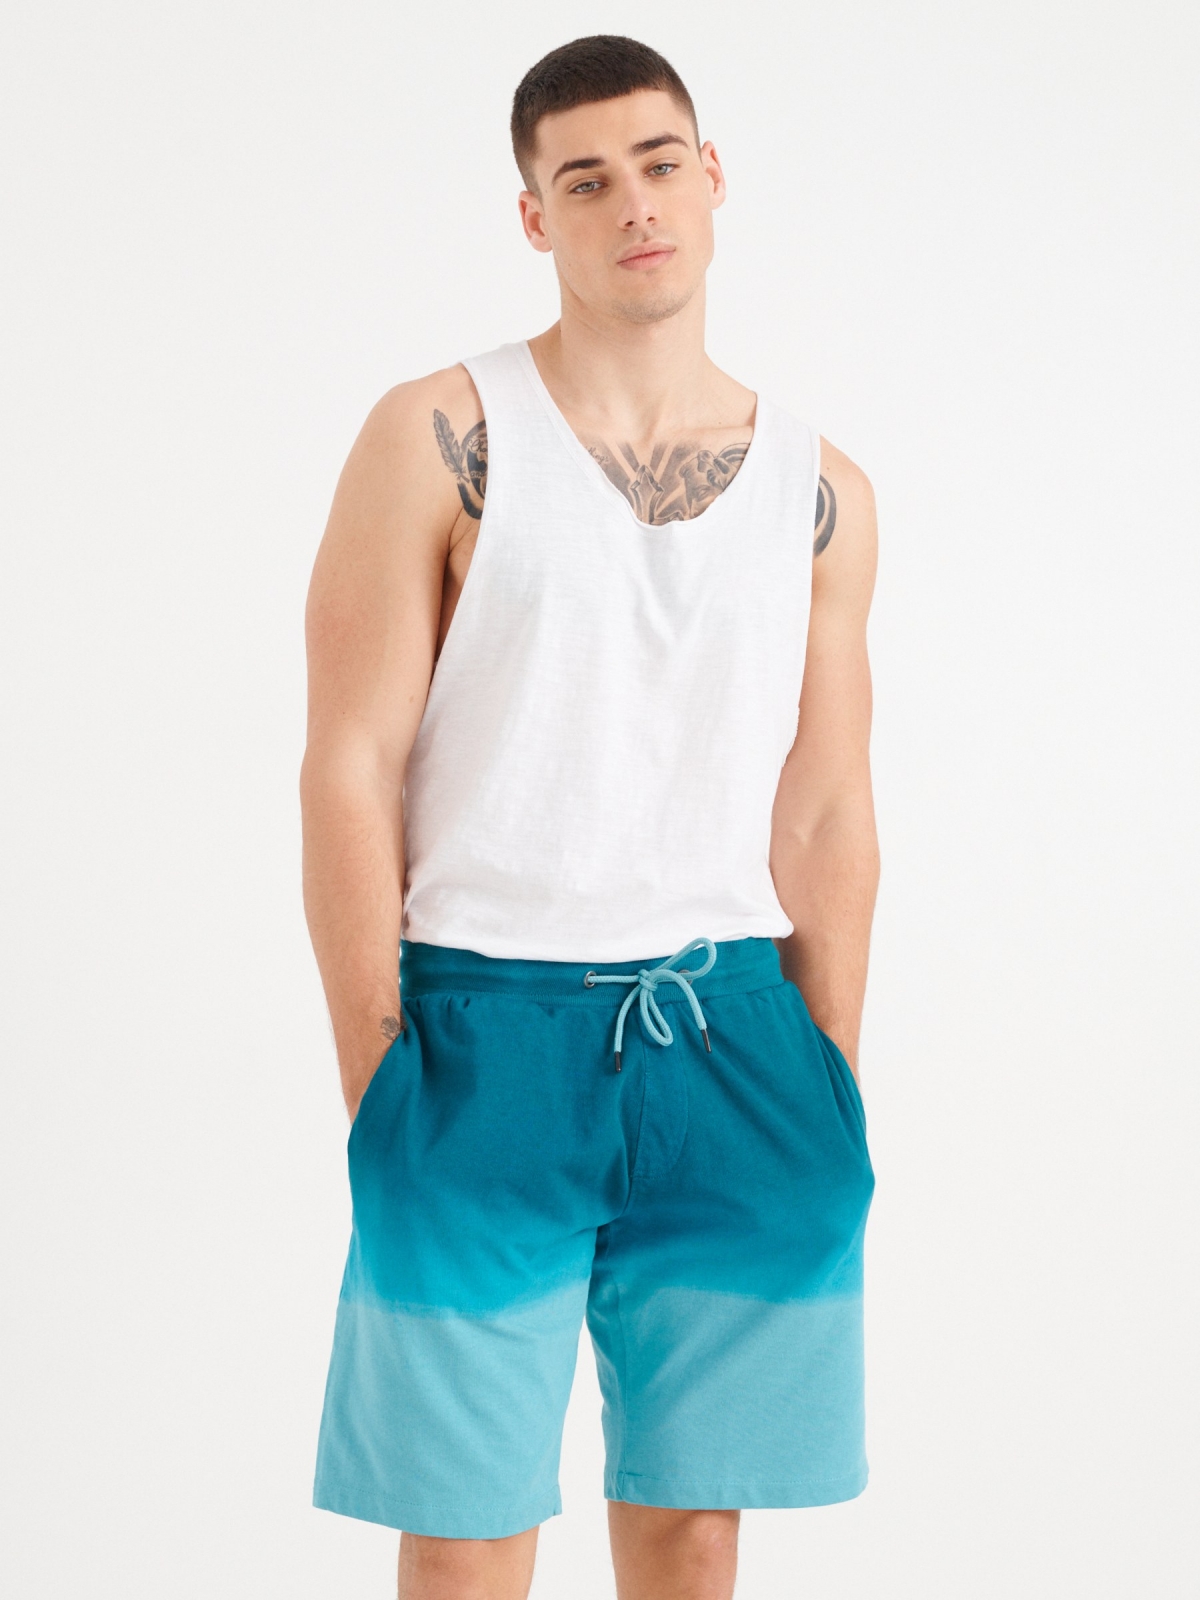 Gradient effect Bermuda shorts blue middle front view